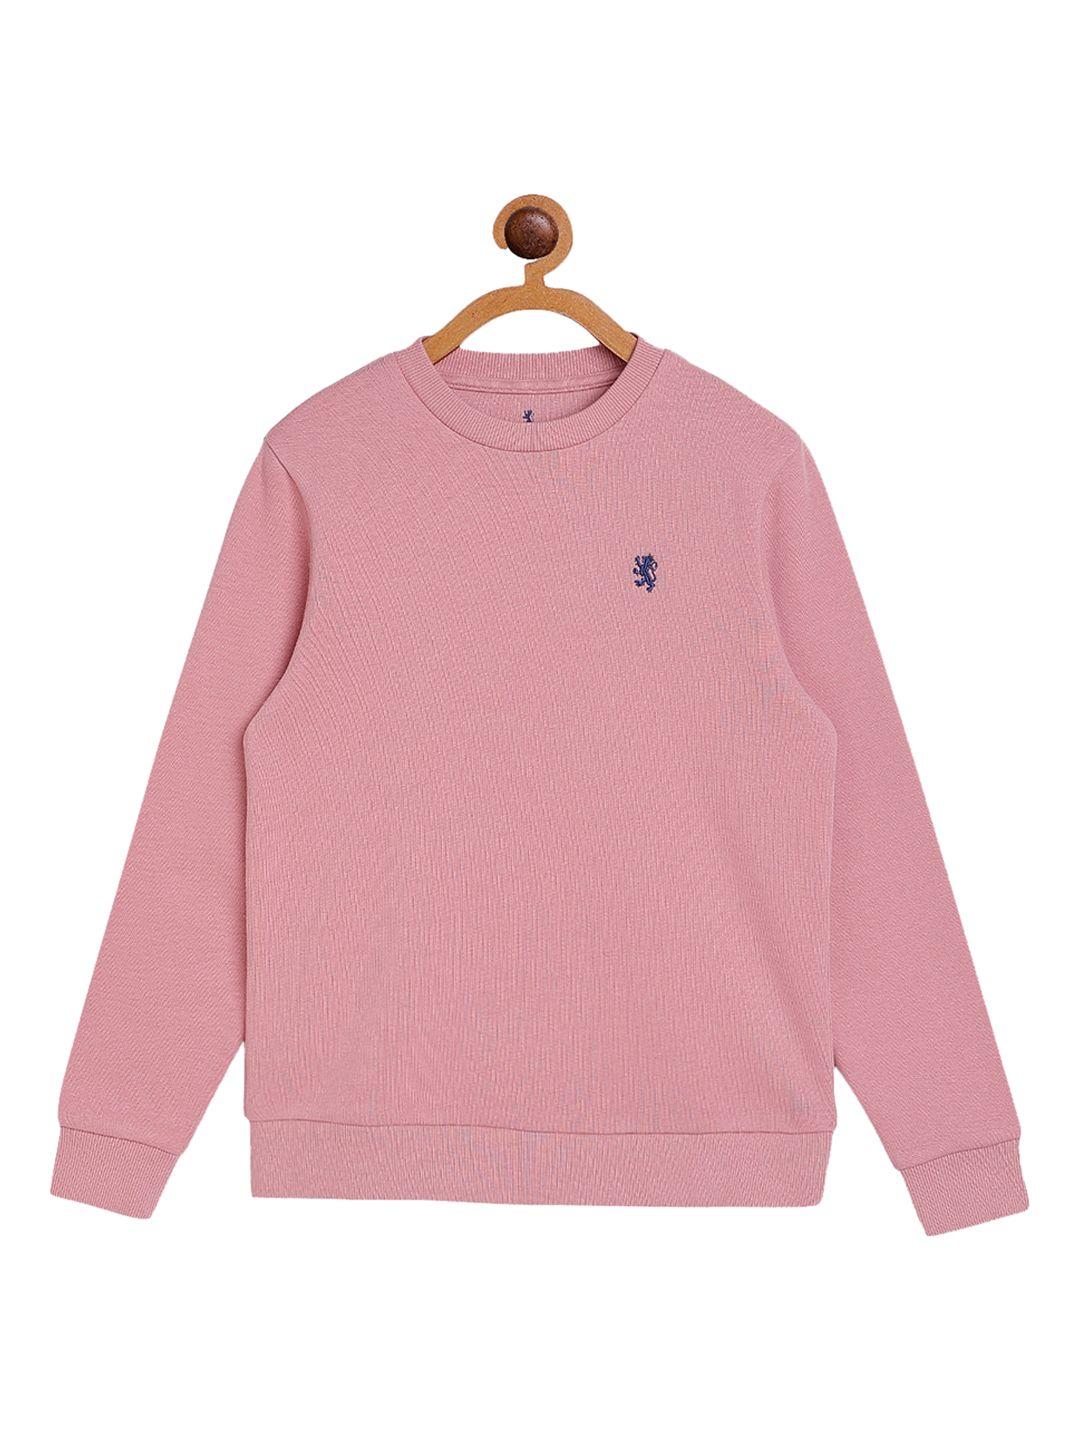 red tape boys coral pink solid sweatshirt